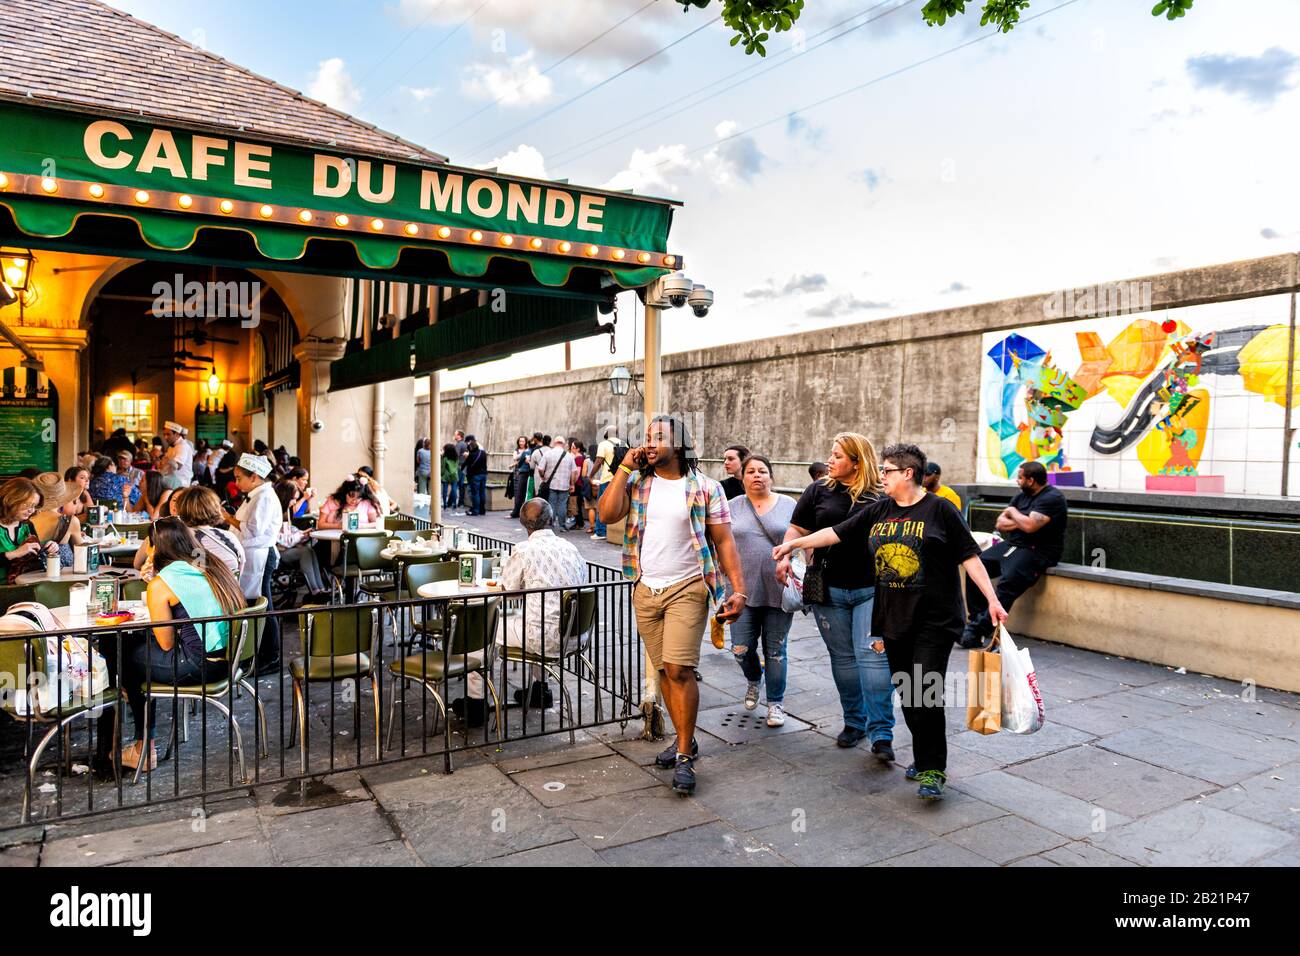 New Orleans, USA - April 22, 2018: People in line waiting to enter Cafe Du Monde restaurant sign eating beignet powdered sugar donuts and chicory coff Stock Photo